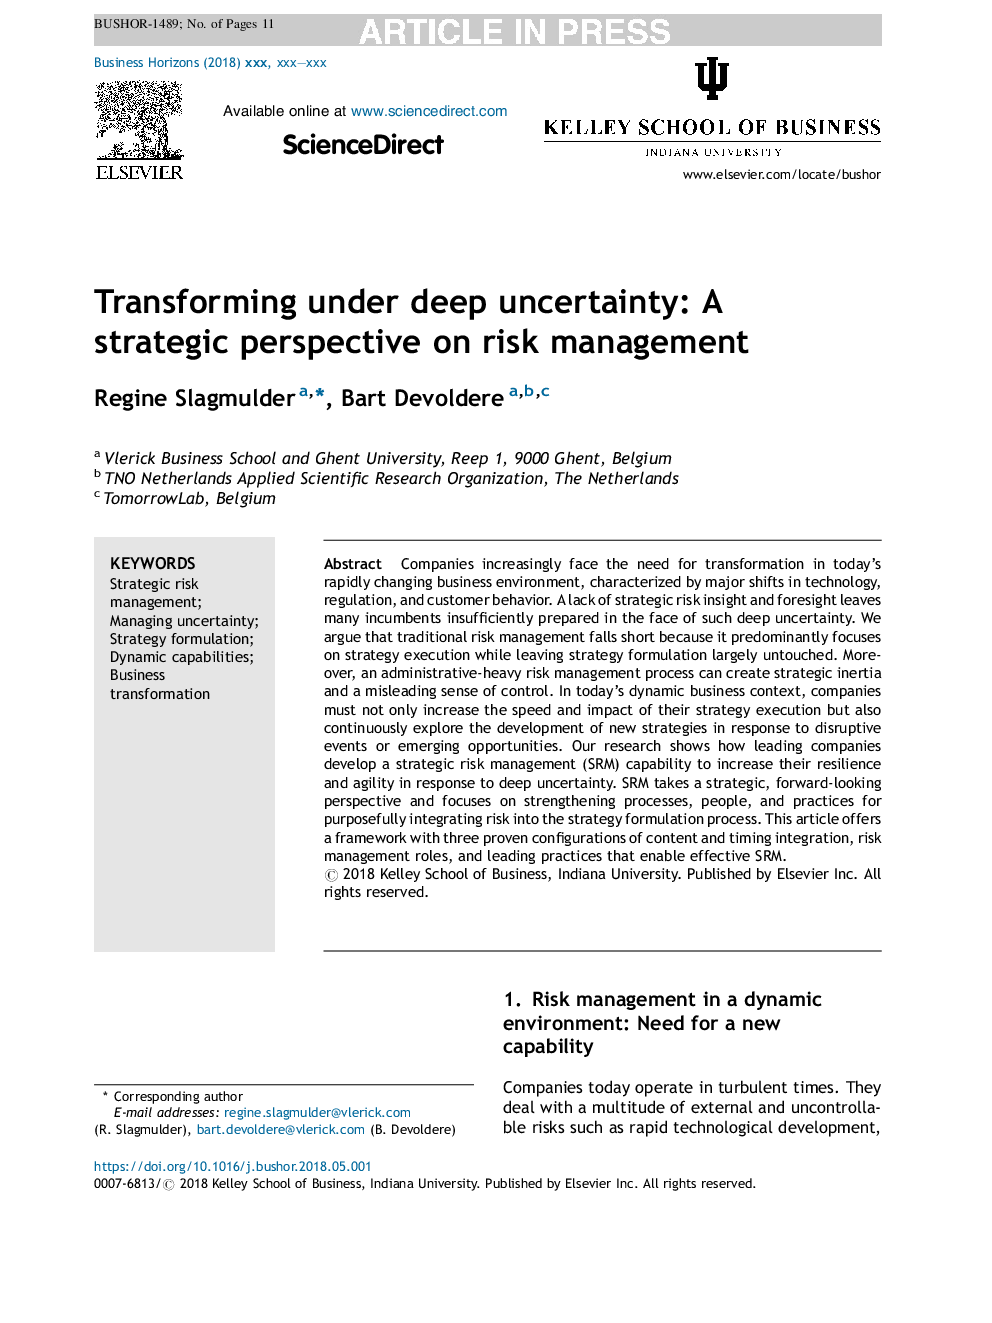 Transforming under deep uncertainty: A strategic perspective on risk management